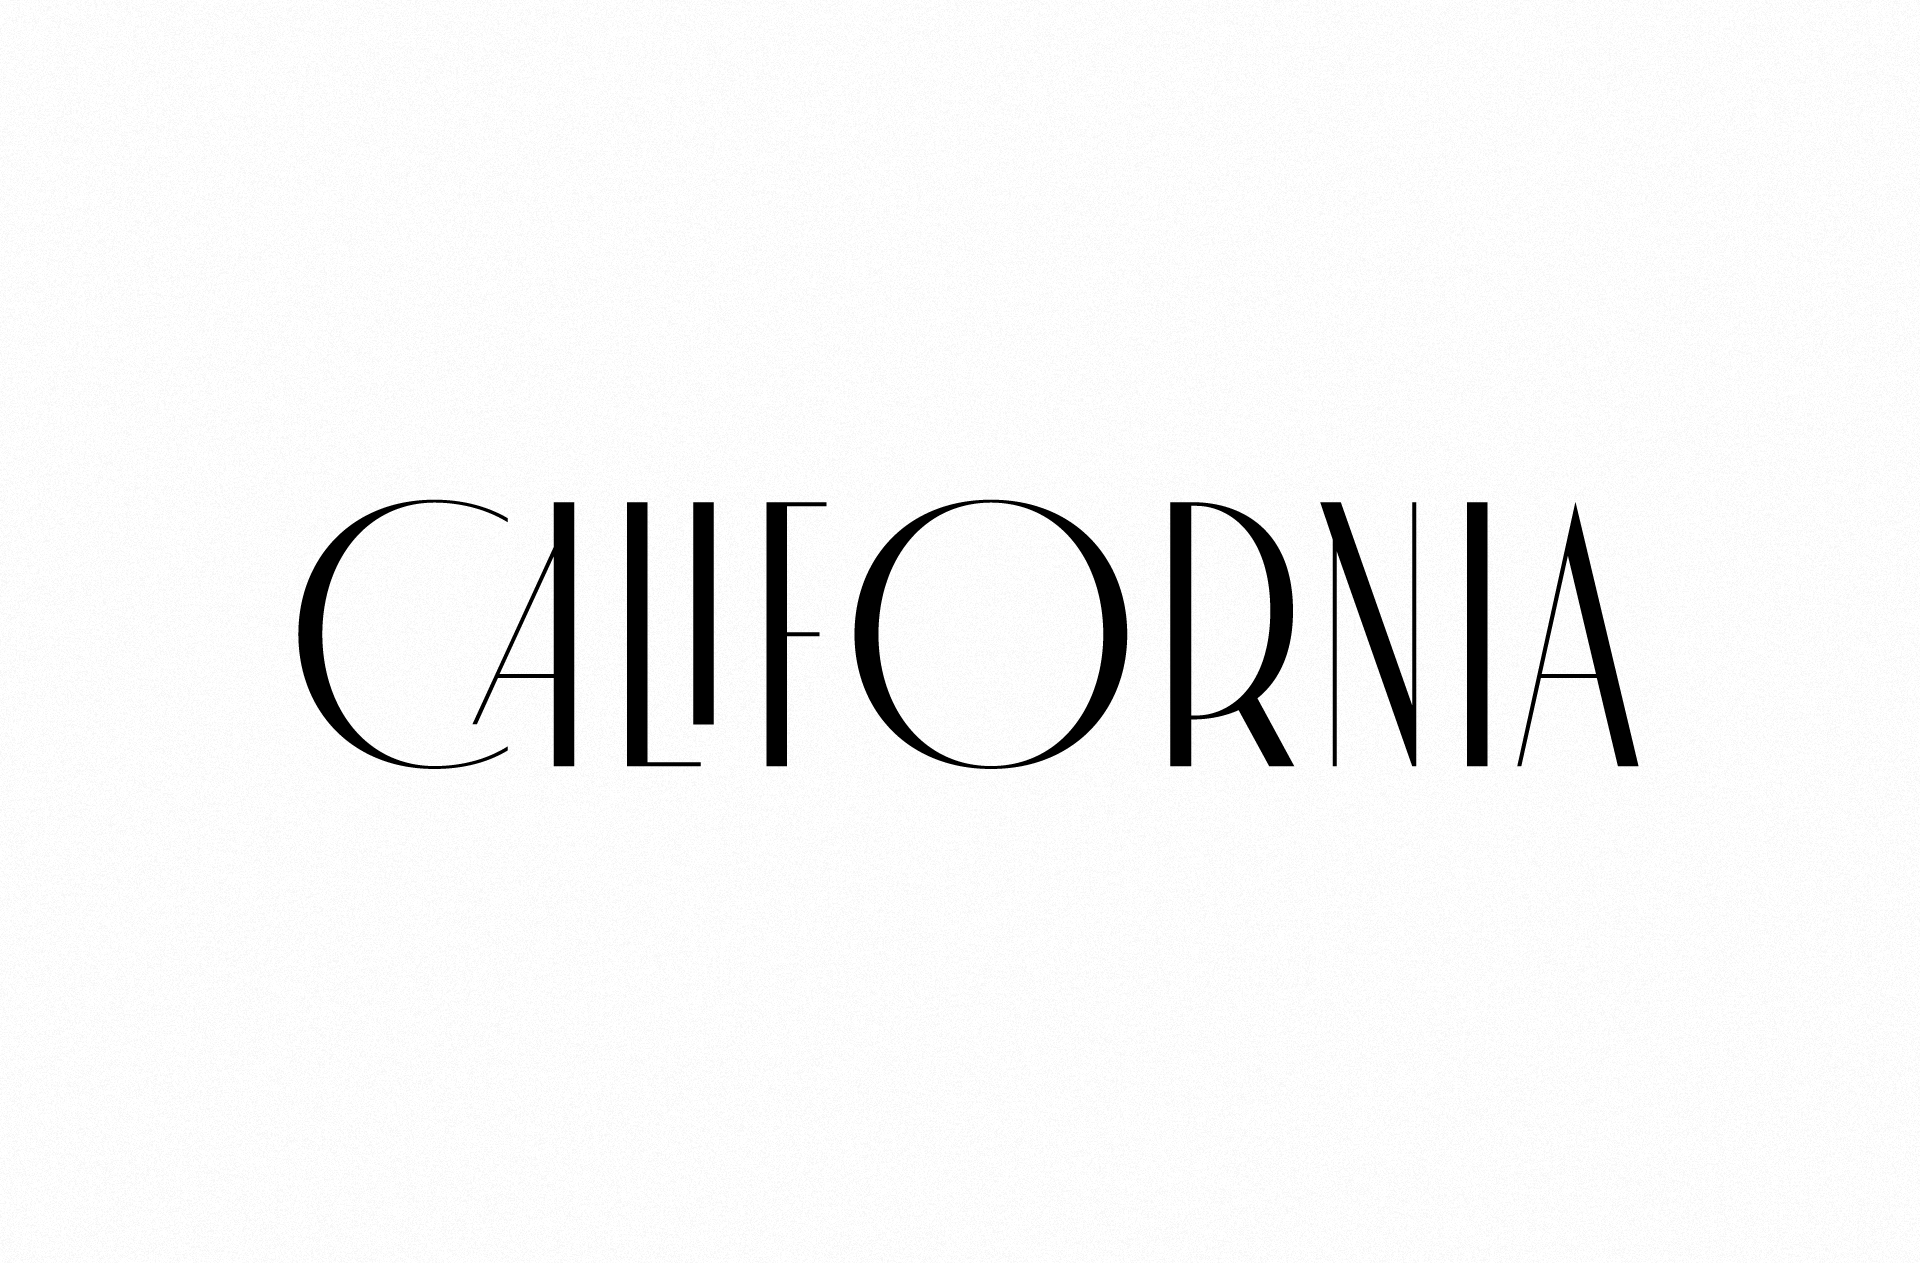 MADE Cannes Regular Font preview